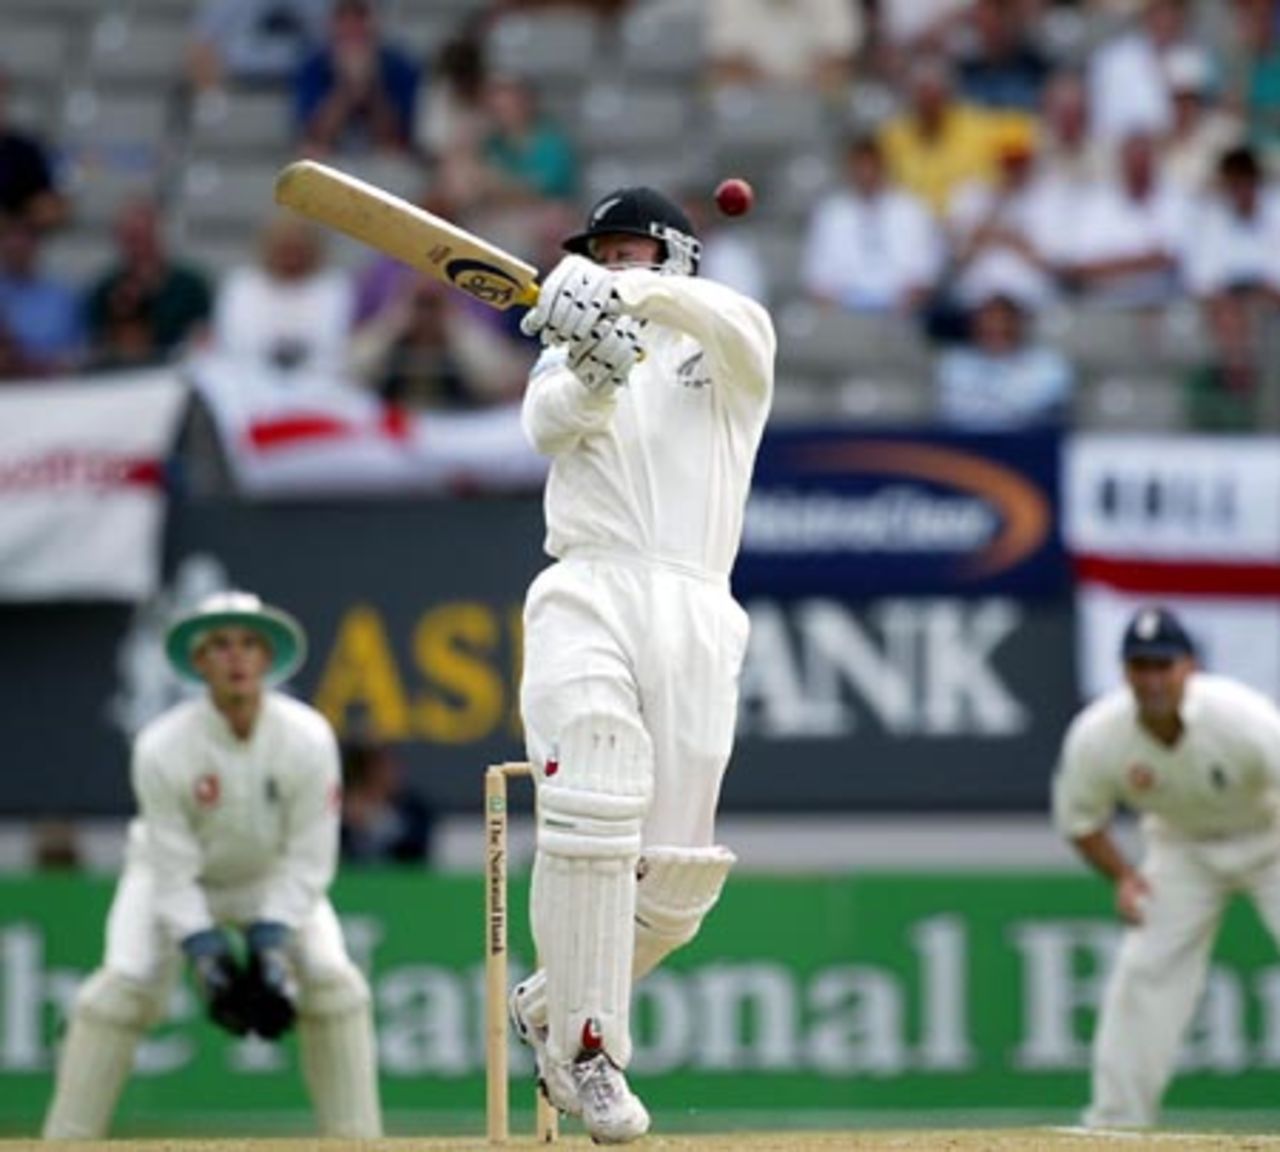 New Zealand batsman Chris Harris misses an attempted pull at a short delivery. Harris ended the first day on 55 not out. 3rd Test: New Zealand v England at Eden Park, Auckland, 30 March-3 April 2002 (30 March 2002).